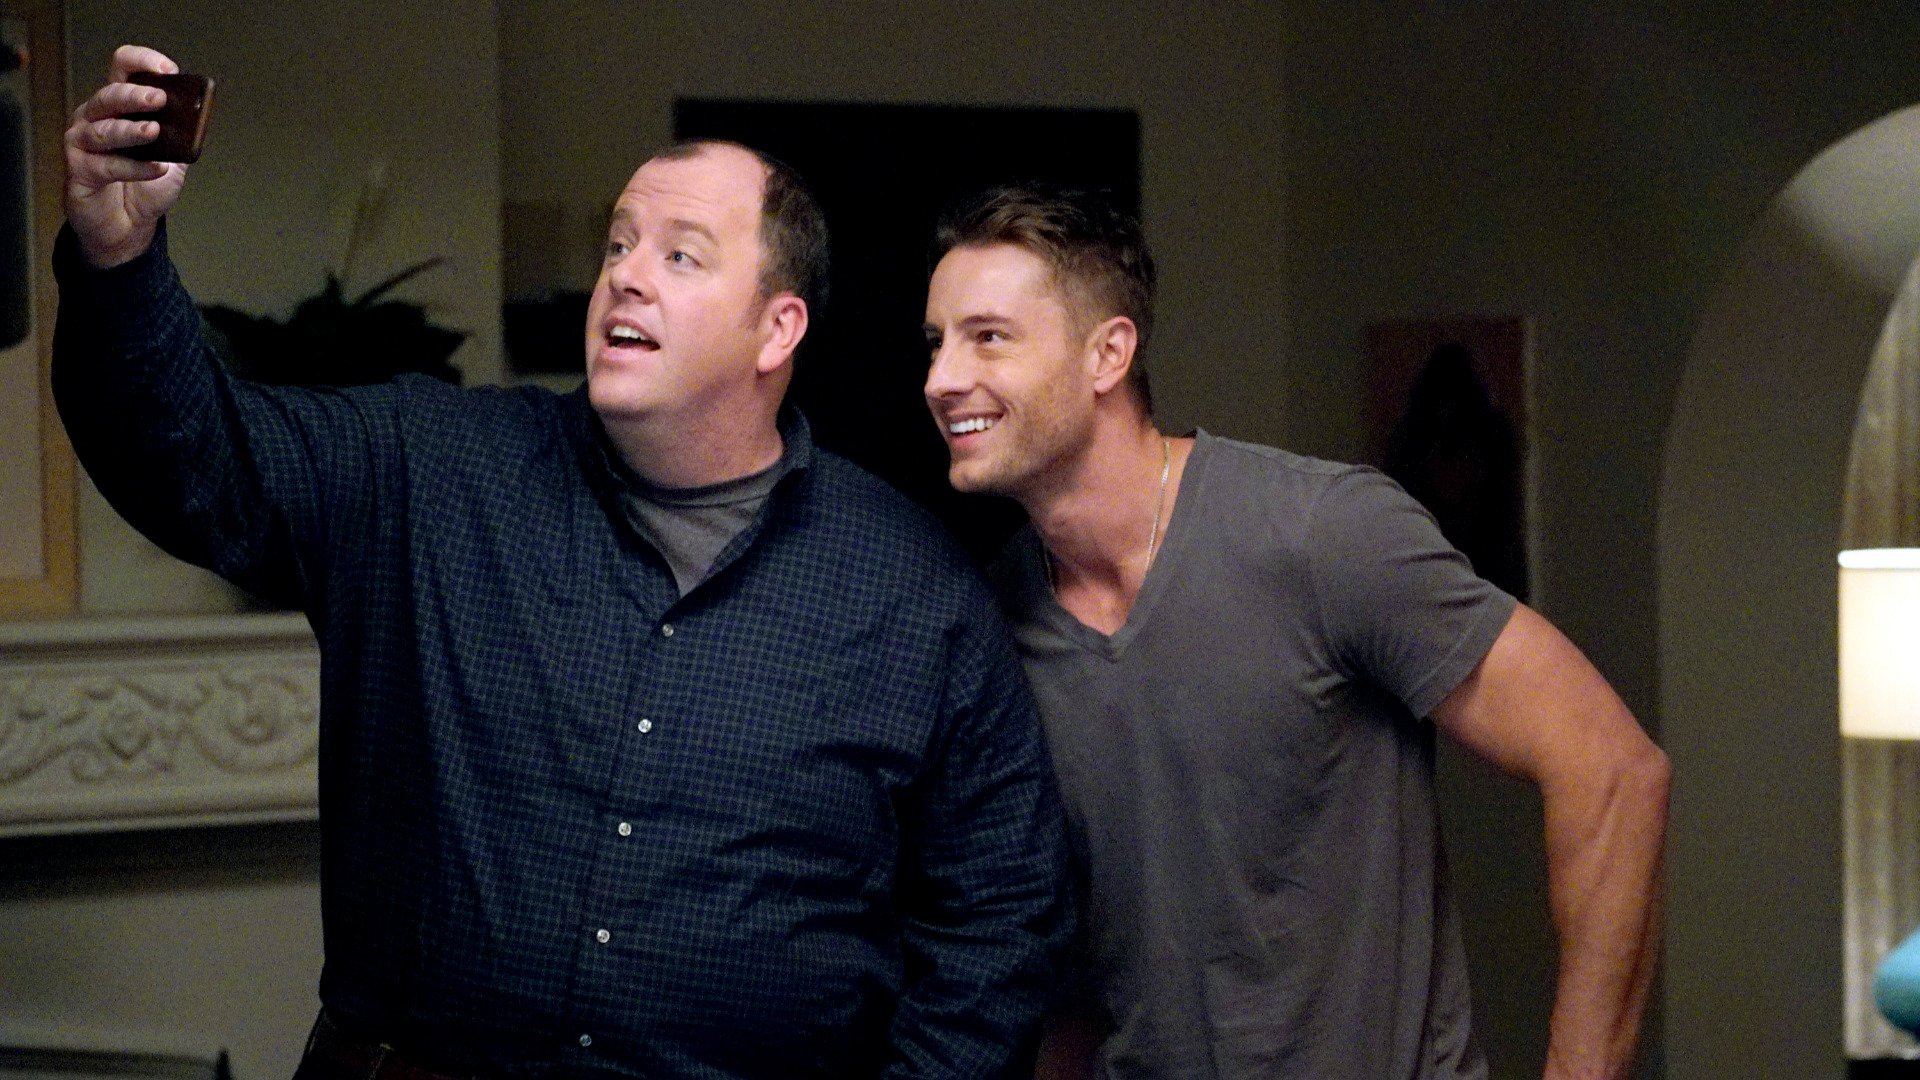 Chris Sullivan as Toby and Justin Hartley as Kevin take a selfie together in the pilot episode of ‘This Is Us’